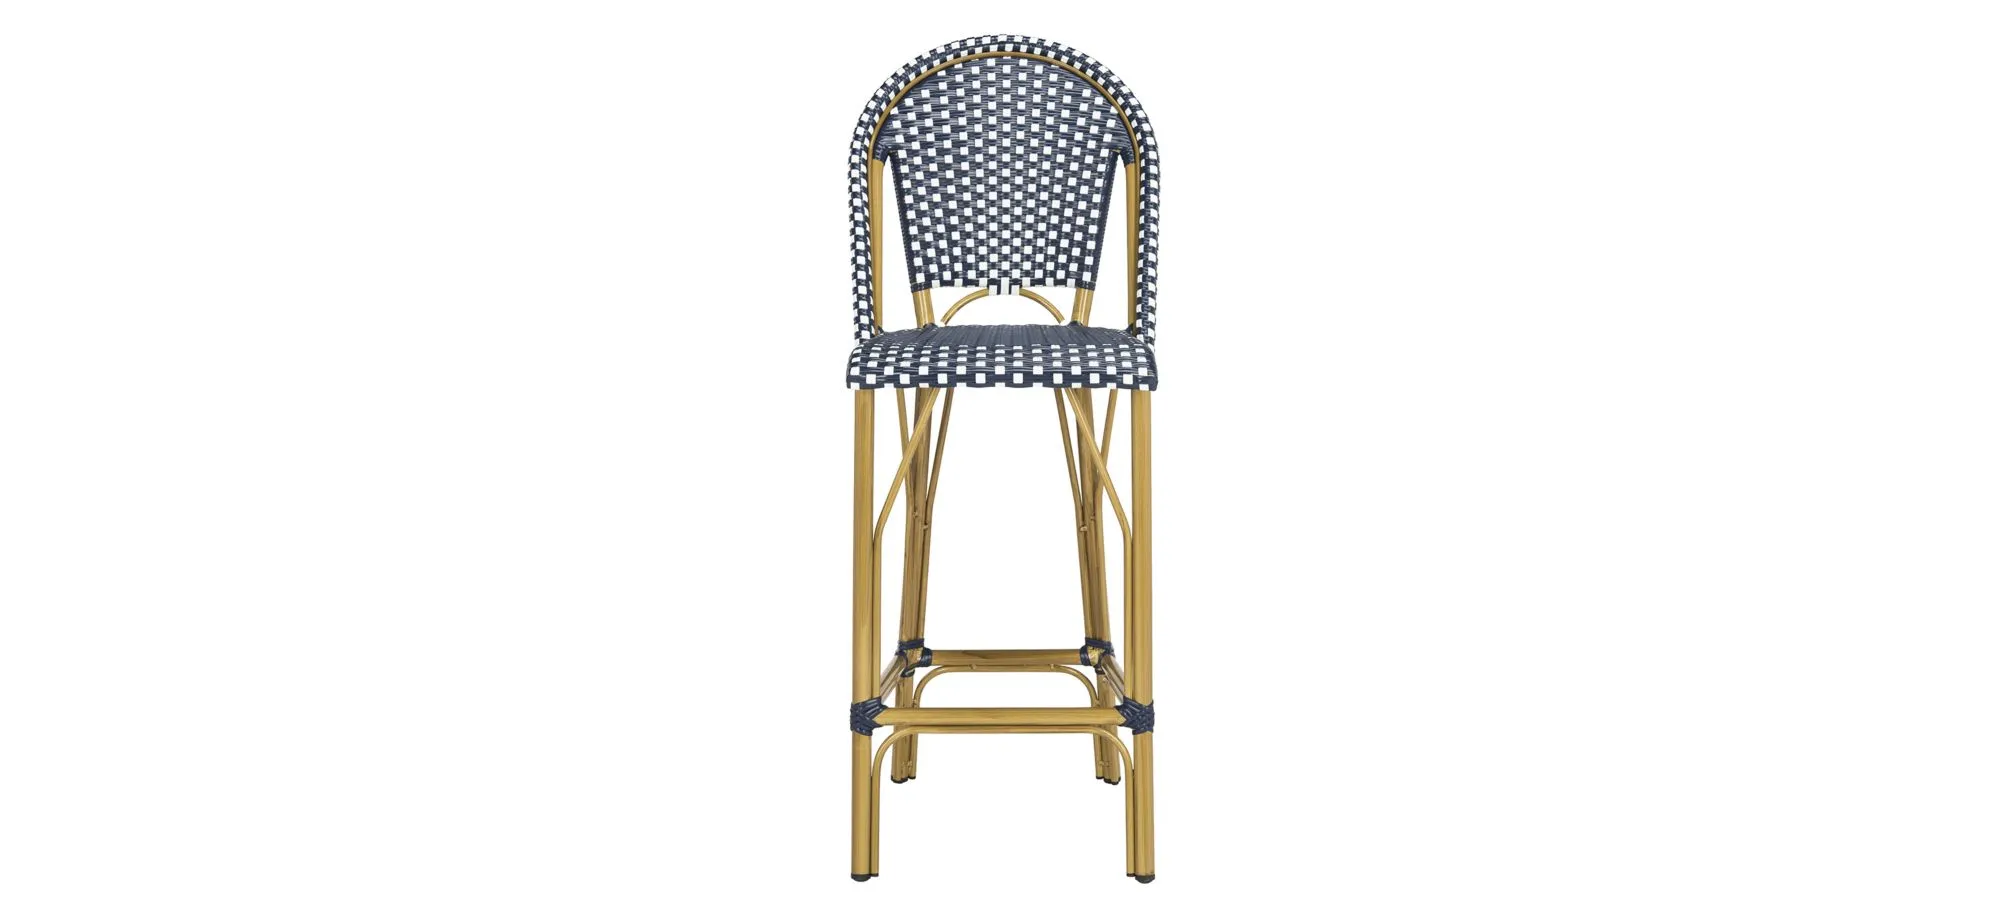 Blaze Outdoor French Bistro Bar Stool in Lime by Safavieh